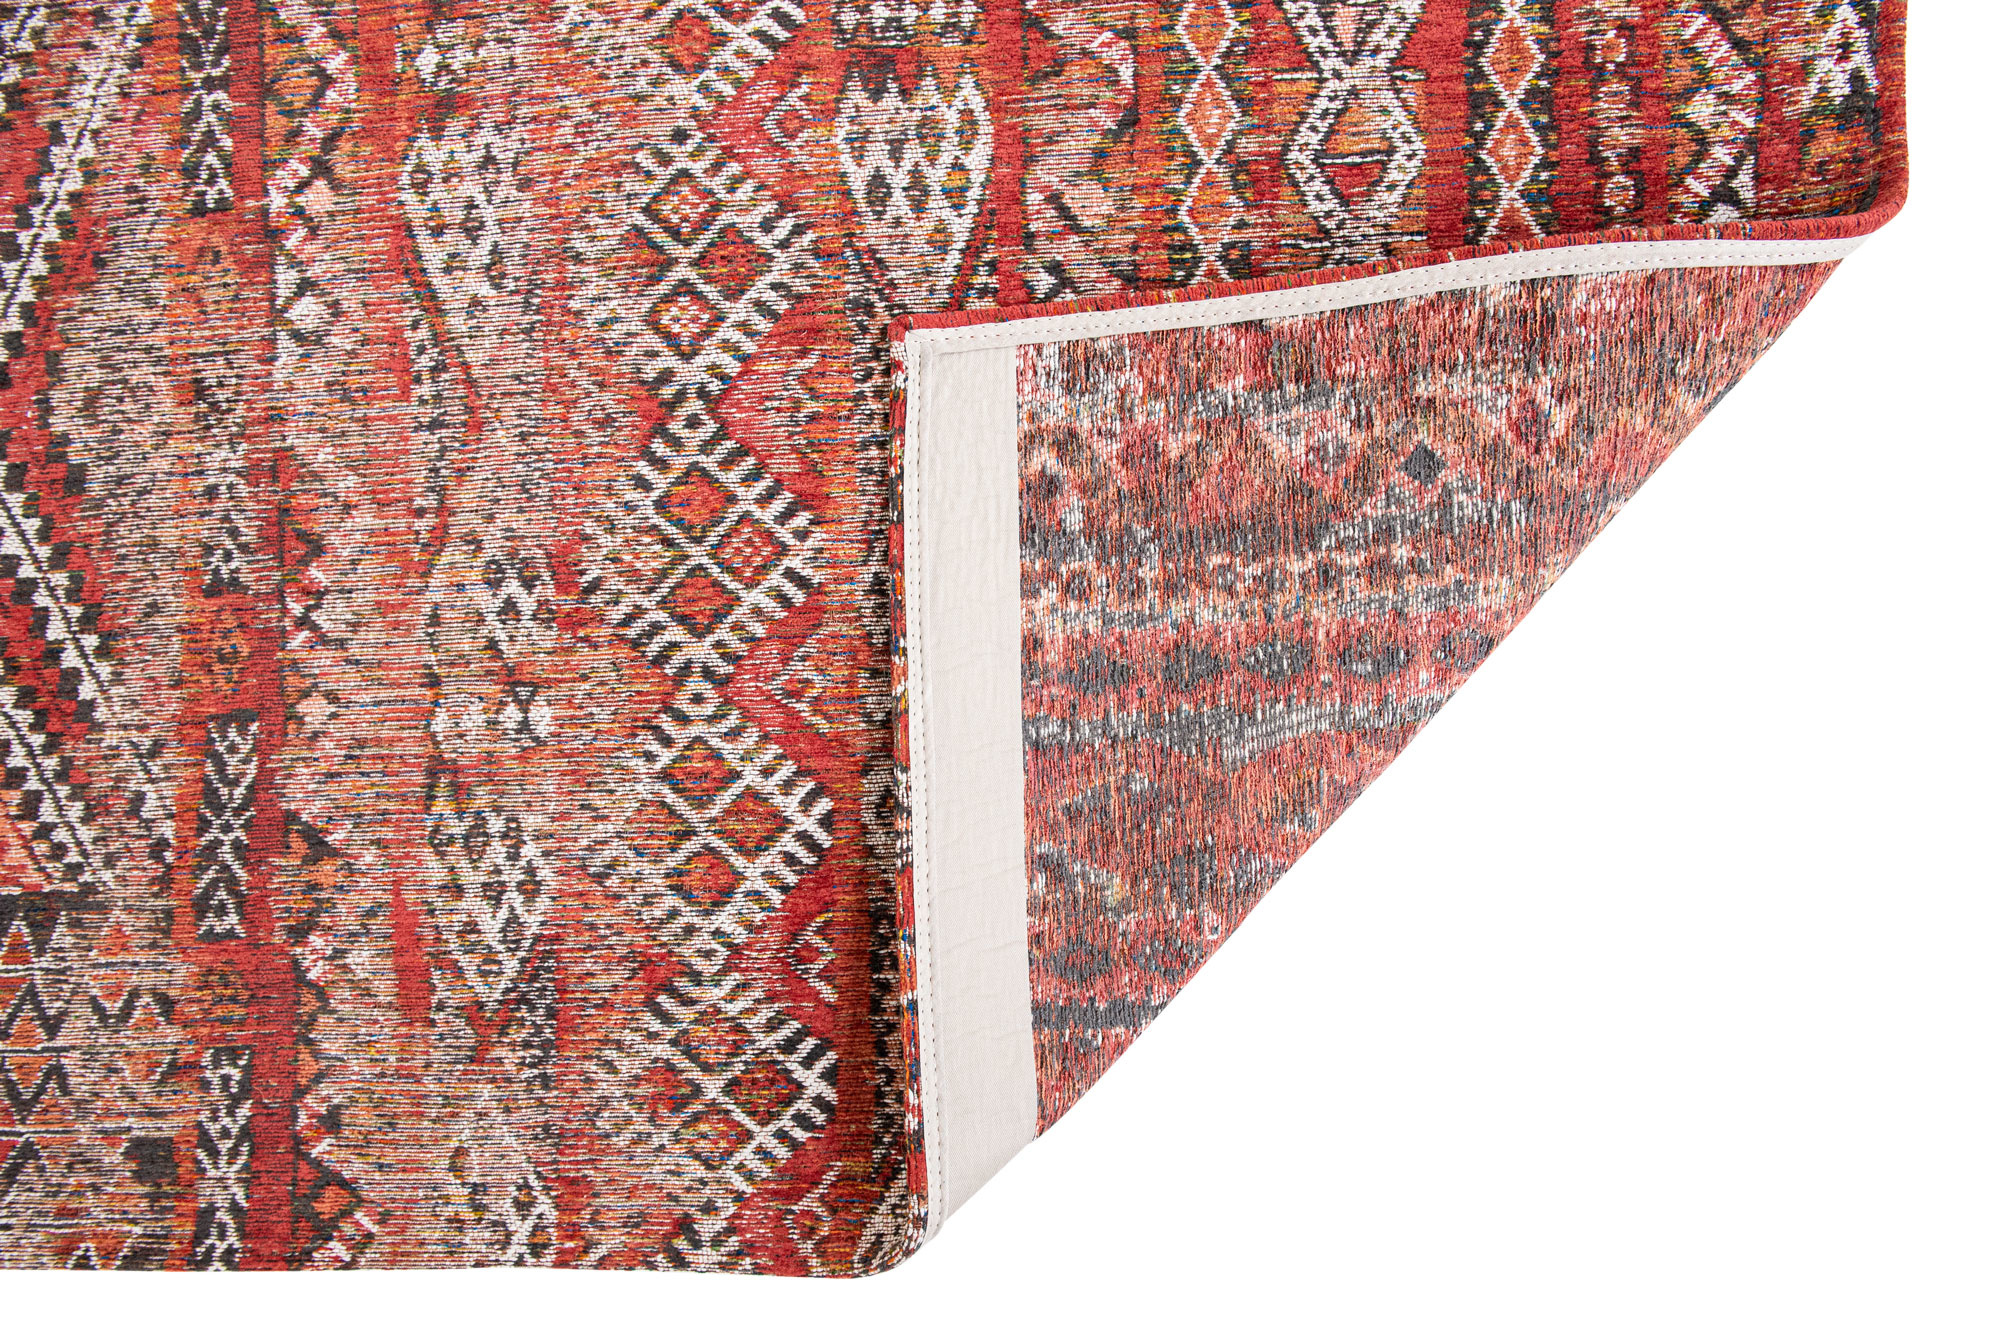 Antiquarian Flatwoven Red Rug ☞ Size: 5' 7" x 8' (170 x 240 cm)